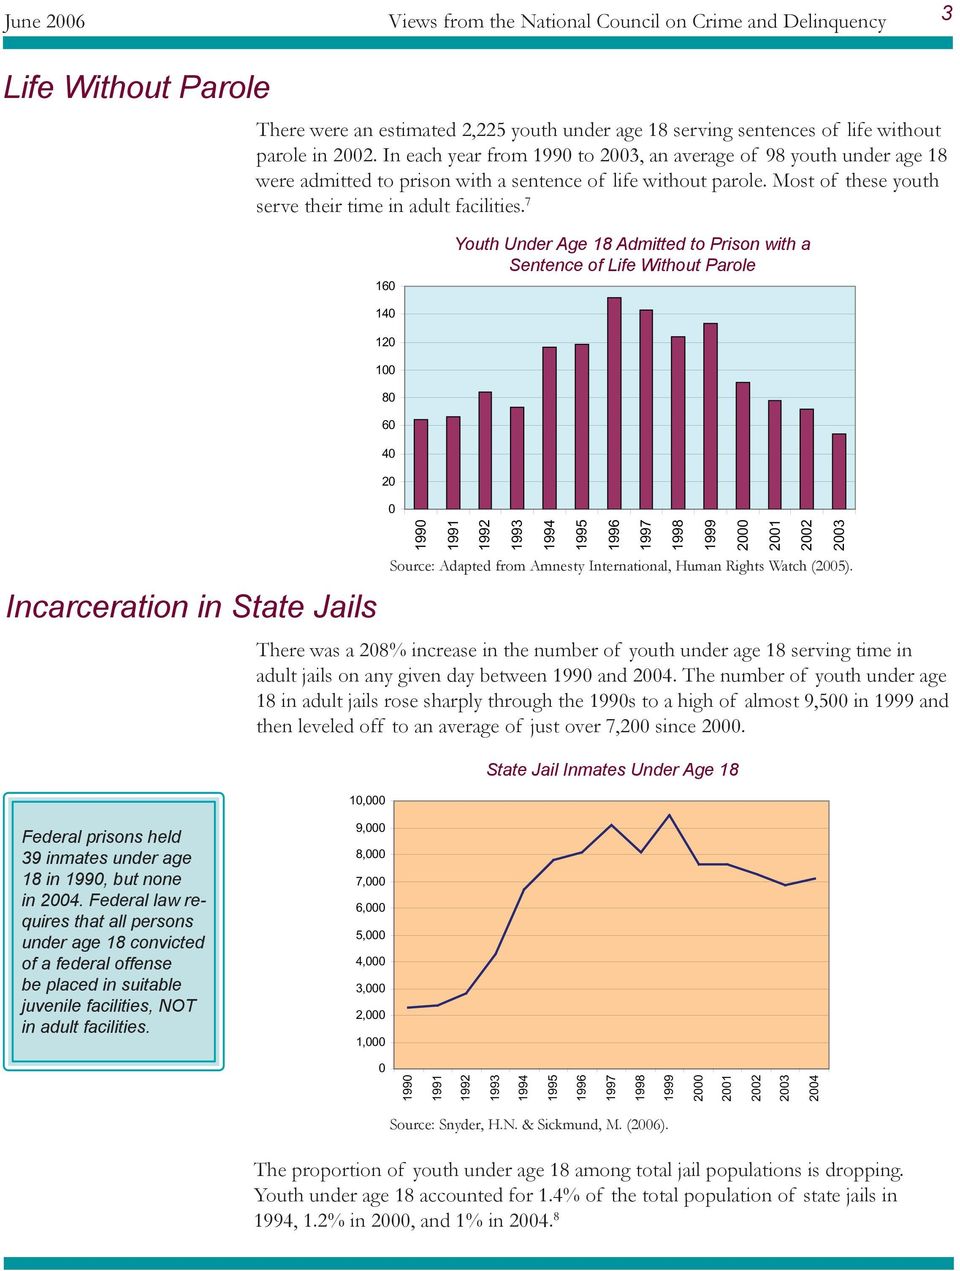 7 16 Youth Under Age 18 Admitted to Prison with a Sentence of Life Without Parole 14 12 1 8 6 4 2 Incarceration in State Jails Source: Adapted from Amnesty International, Human Rights Watch (25).